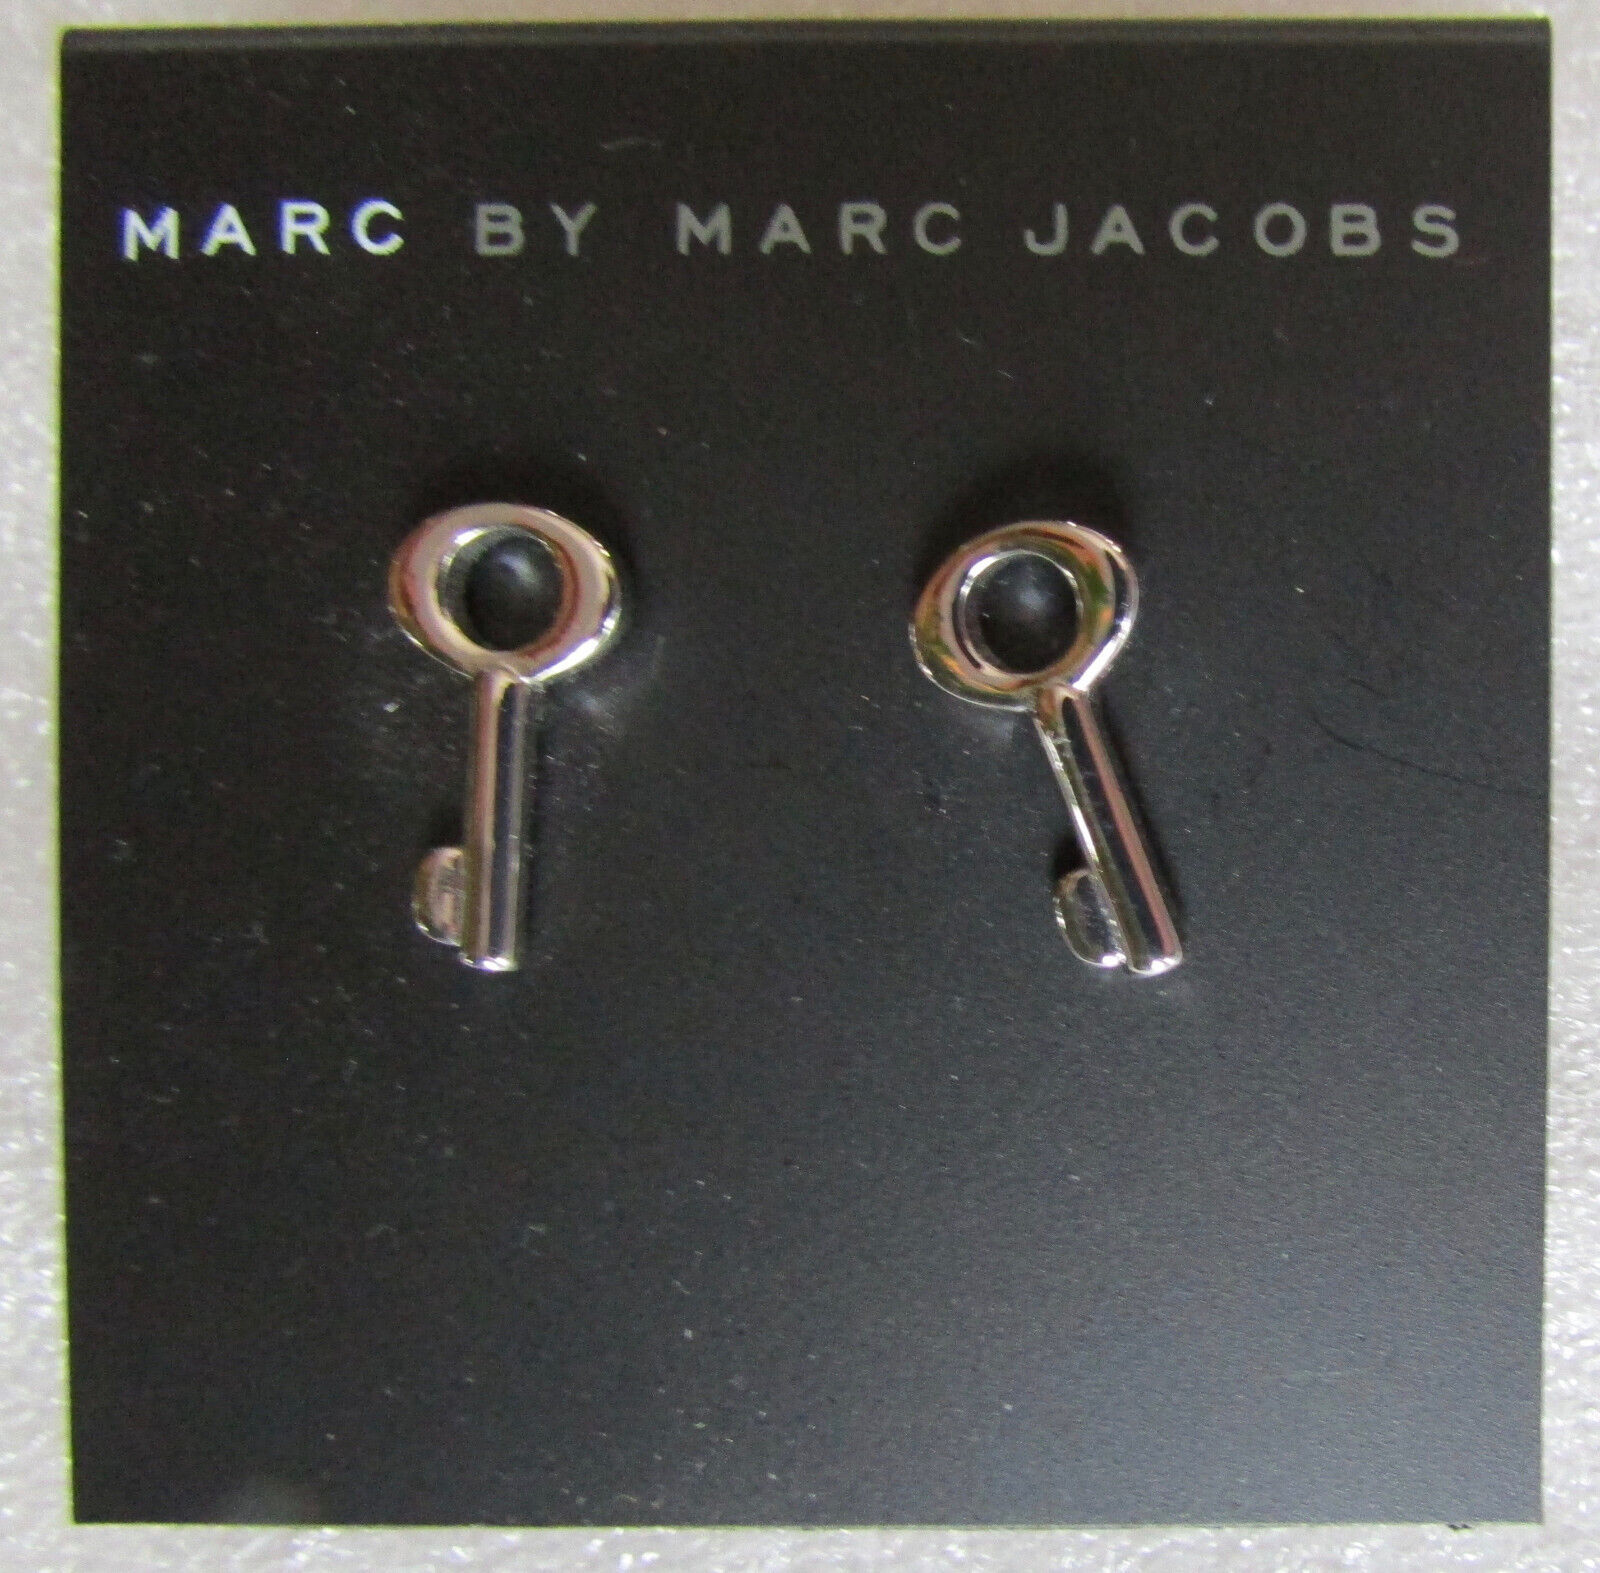 Marc Jacobs Post Earrings Lost and Found Keys Argento Silver Tone New $38 - $27.72